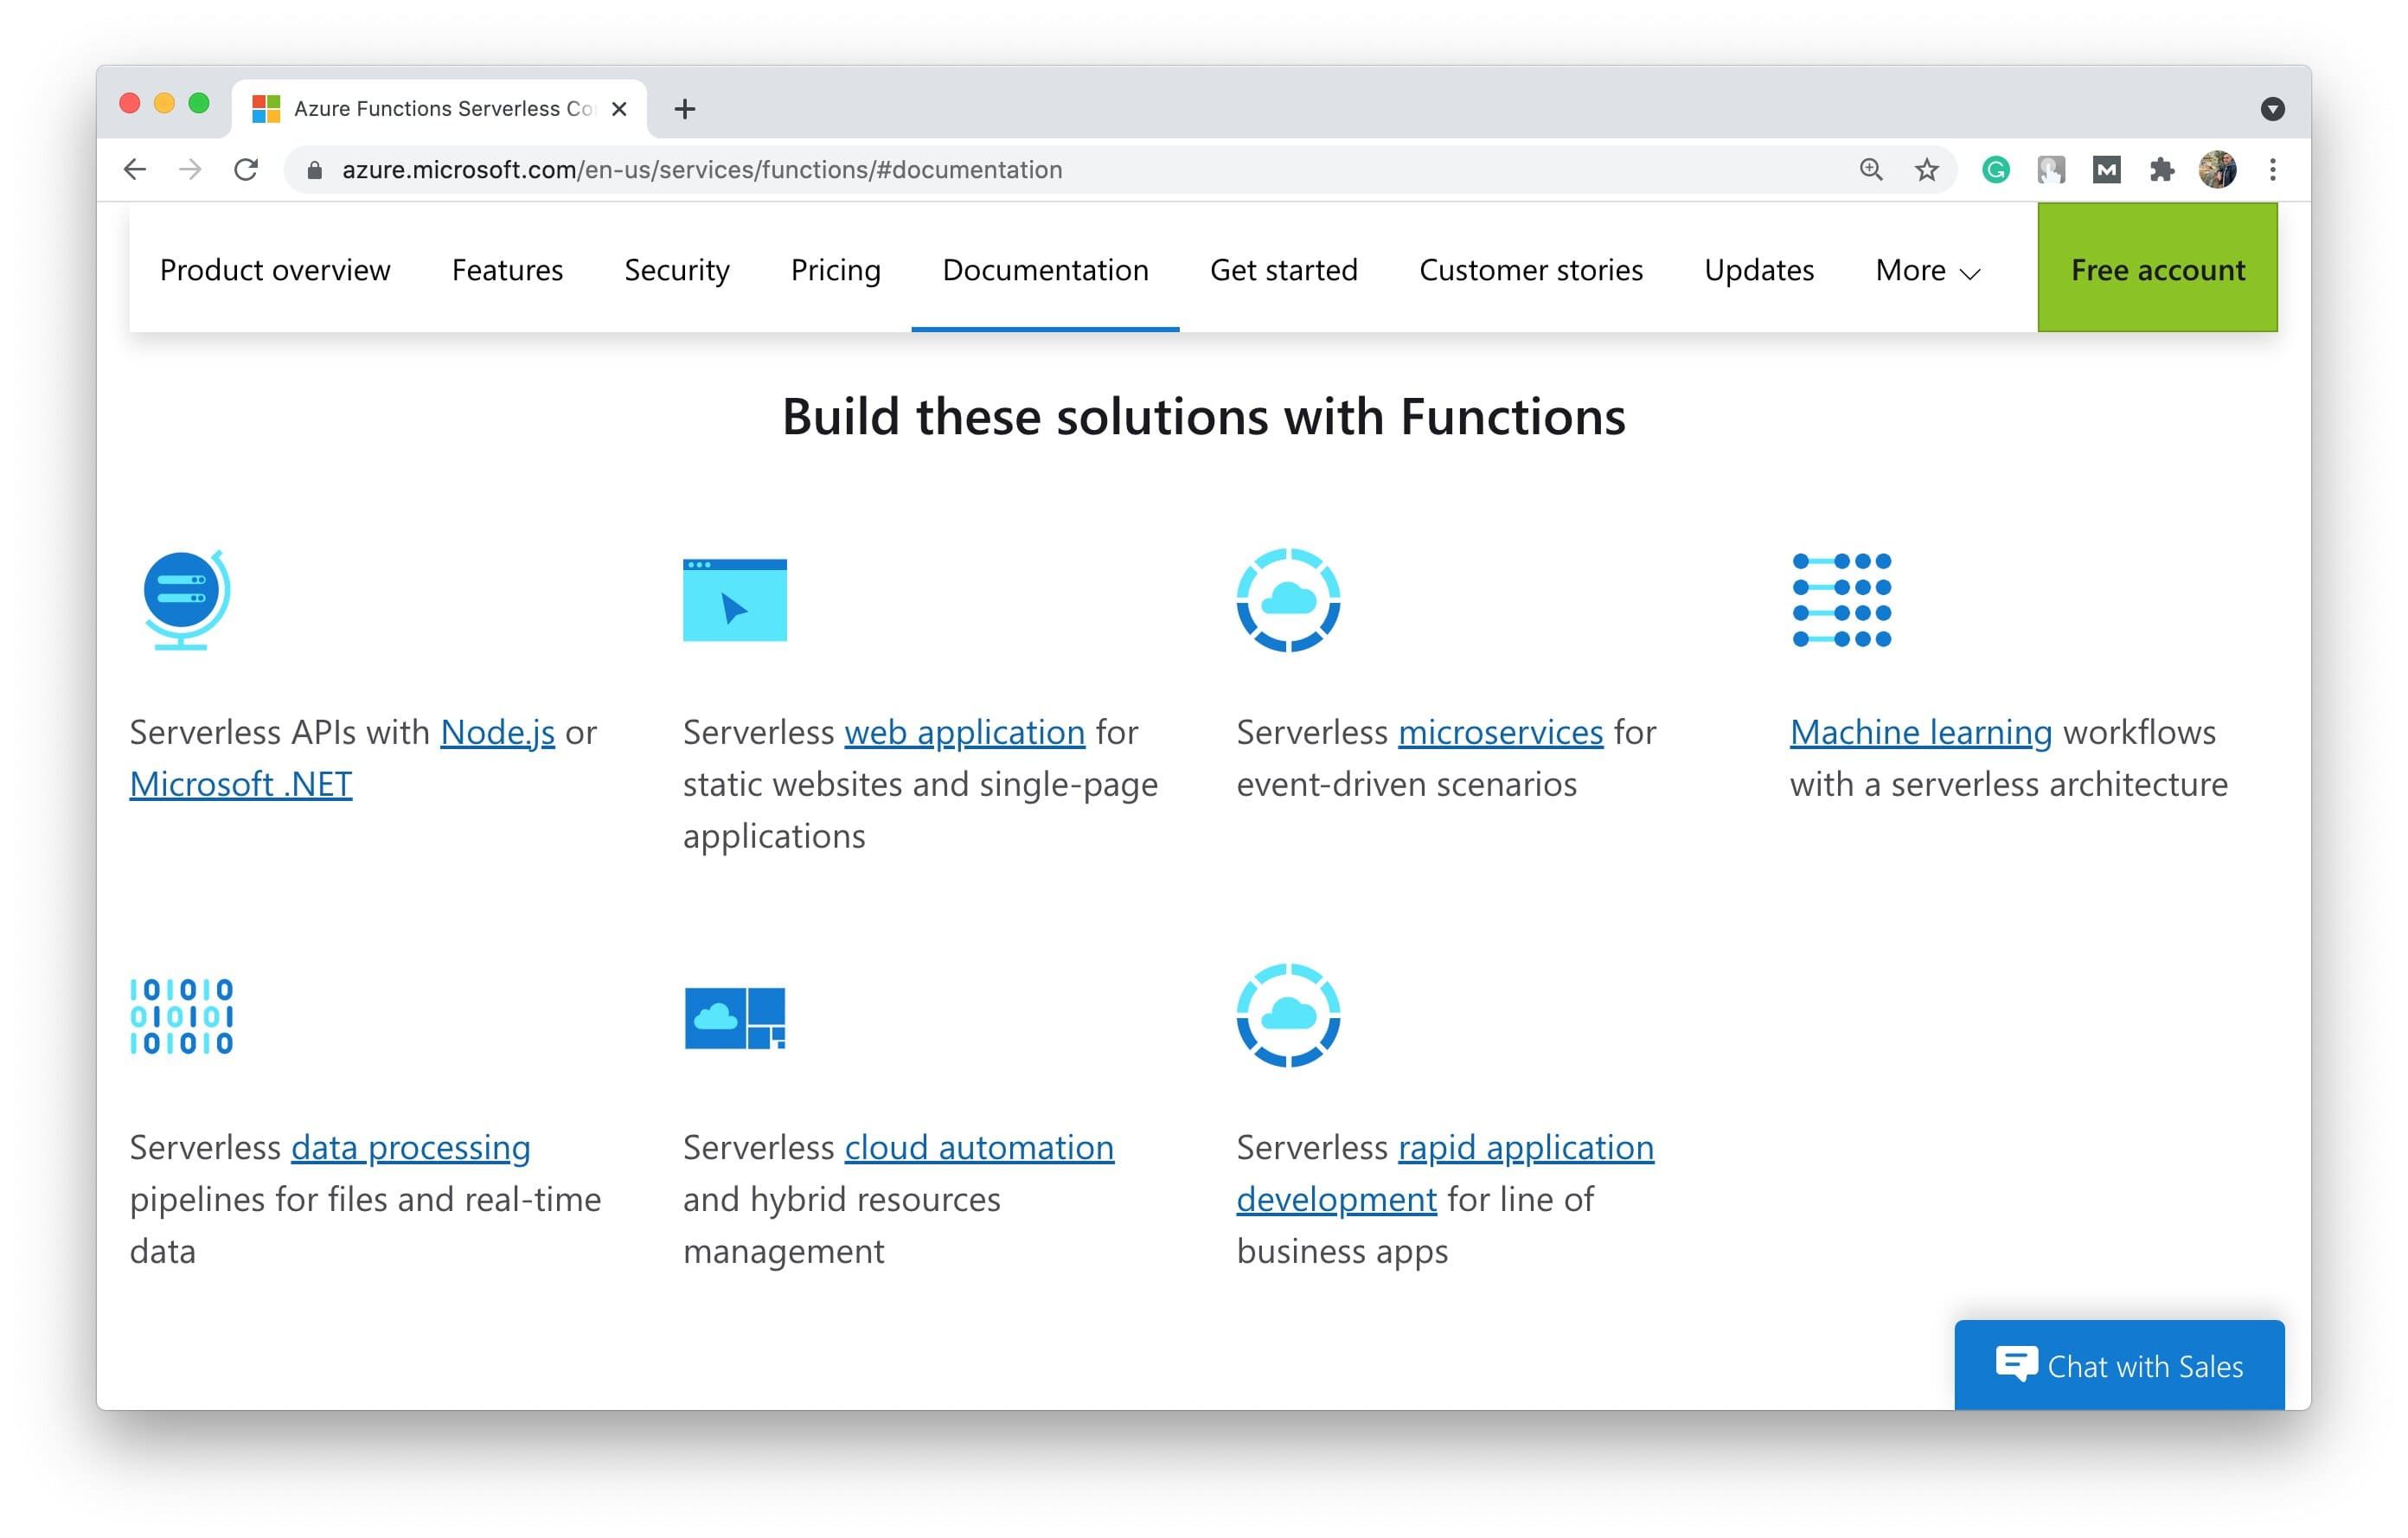 Cloud computing, serverless infrastructure, on-premises infrastructure — these are all parts of Azure set of servers options for their user groups